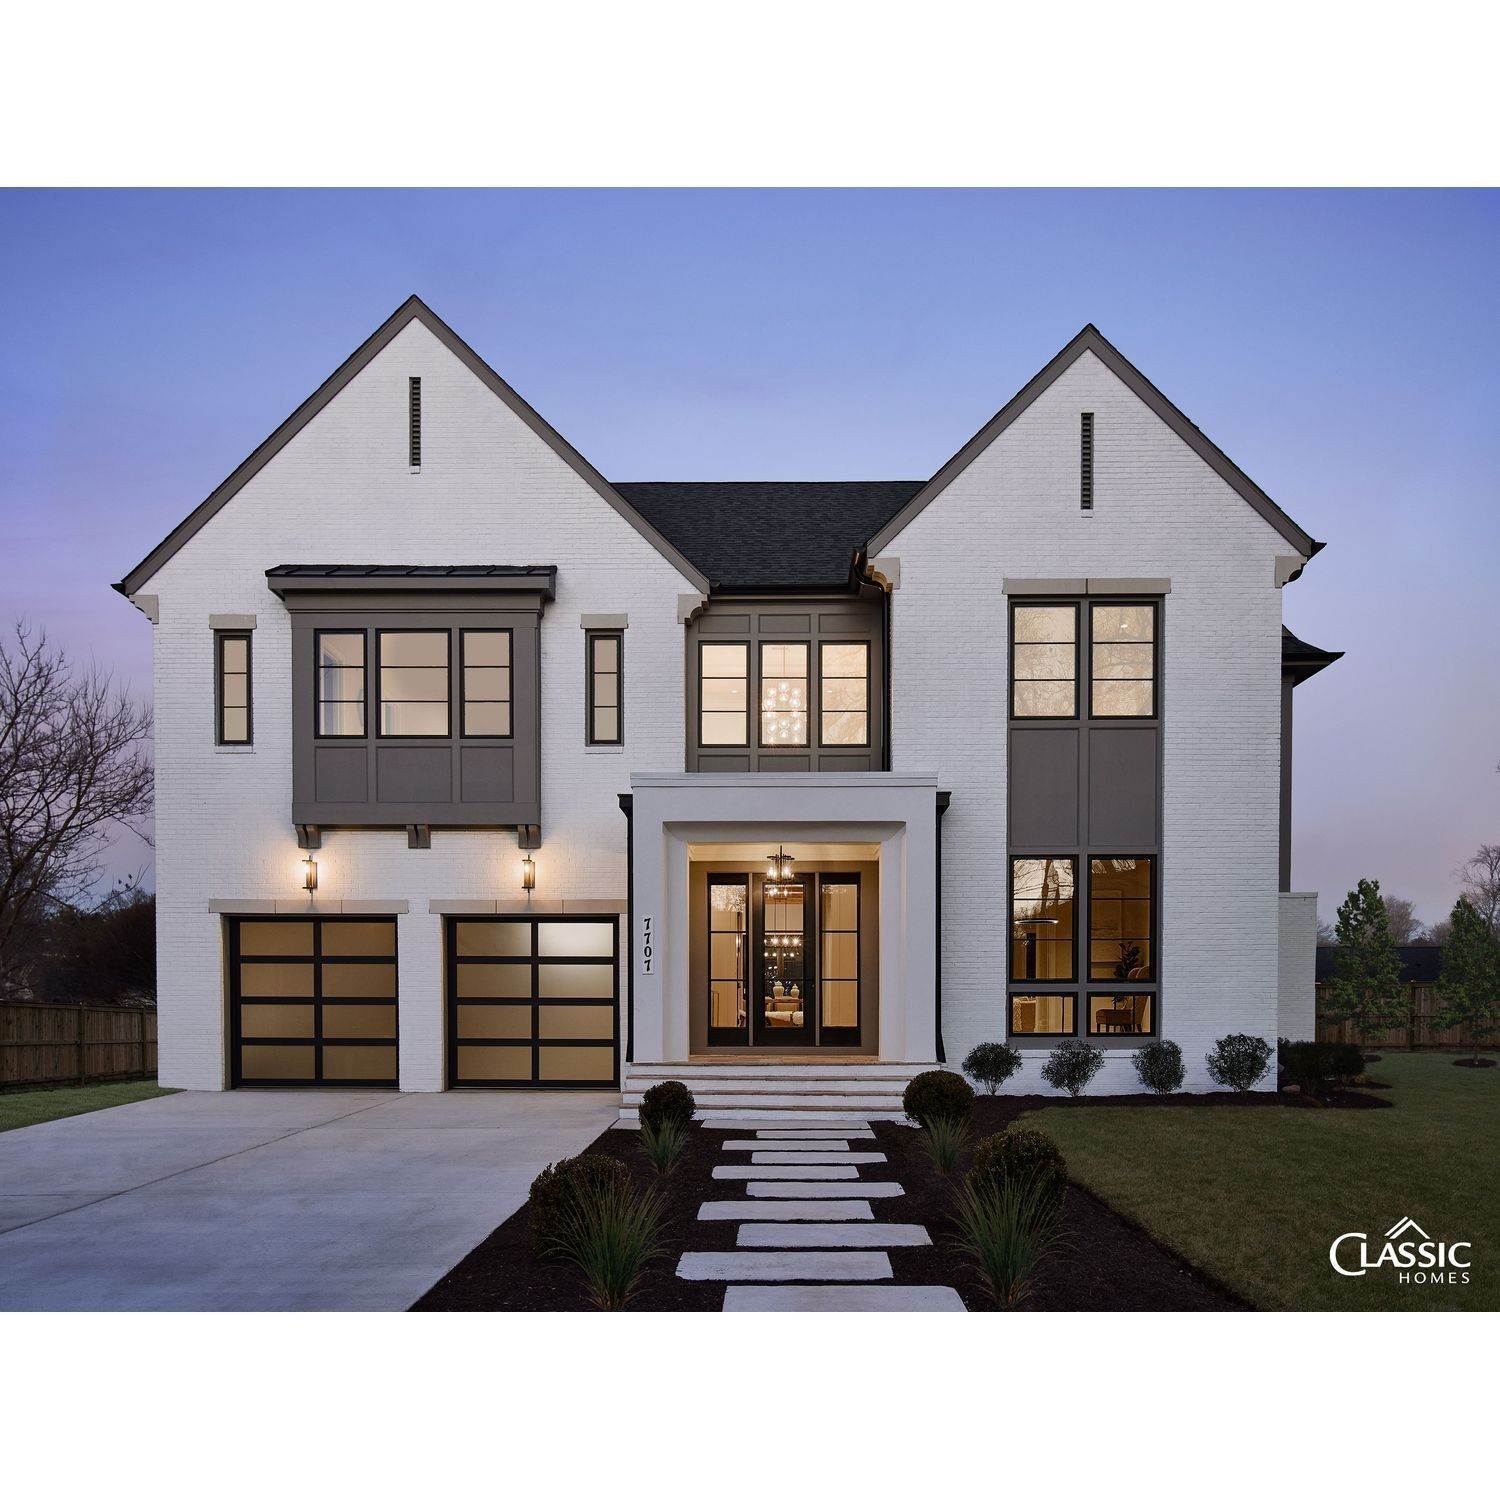 Classic Homes of Maryland - Custom Home Builder (Bethesda) building at Bethesda, MD 20817